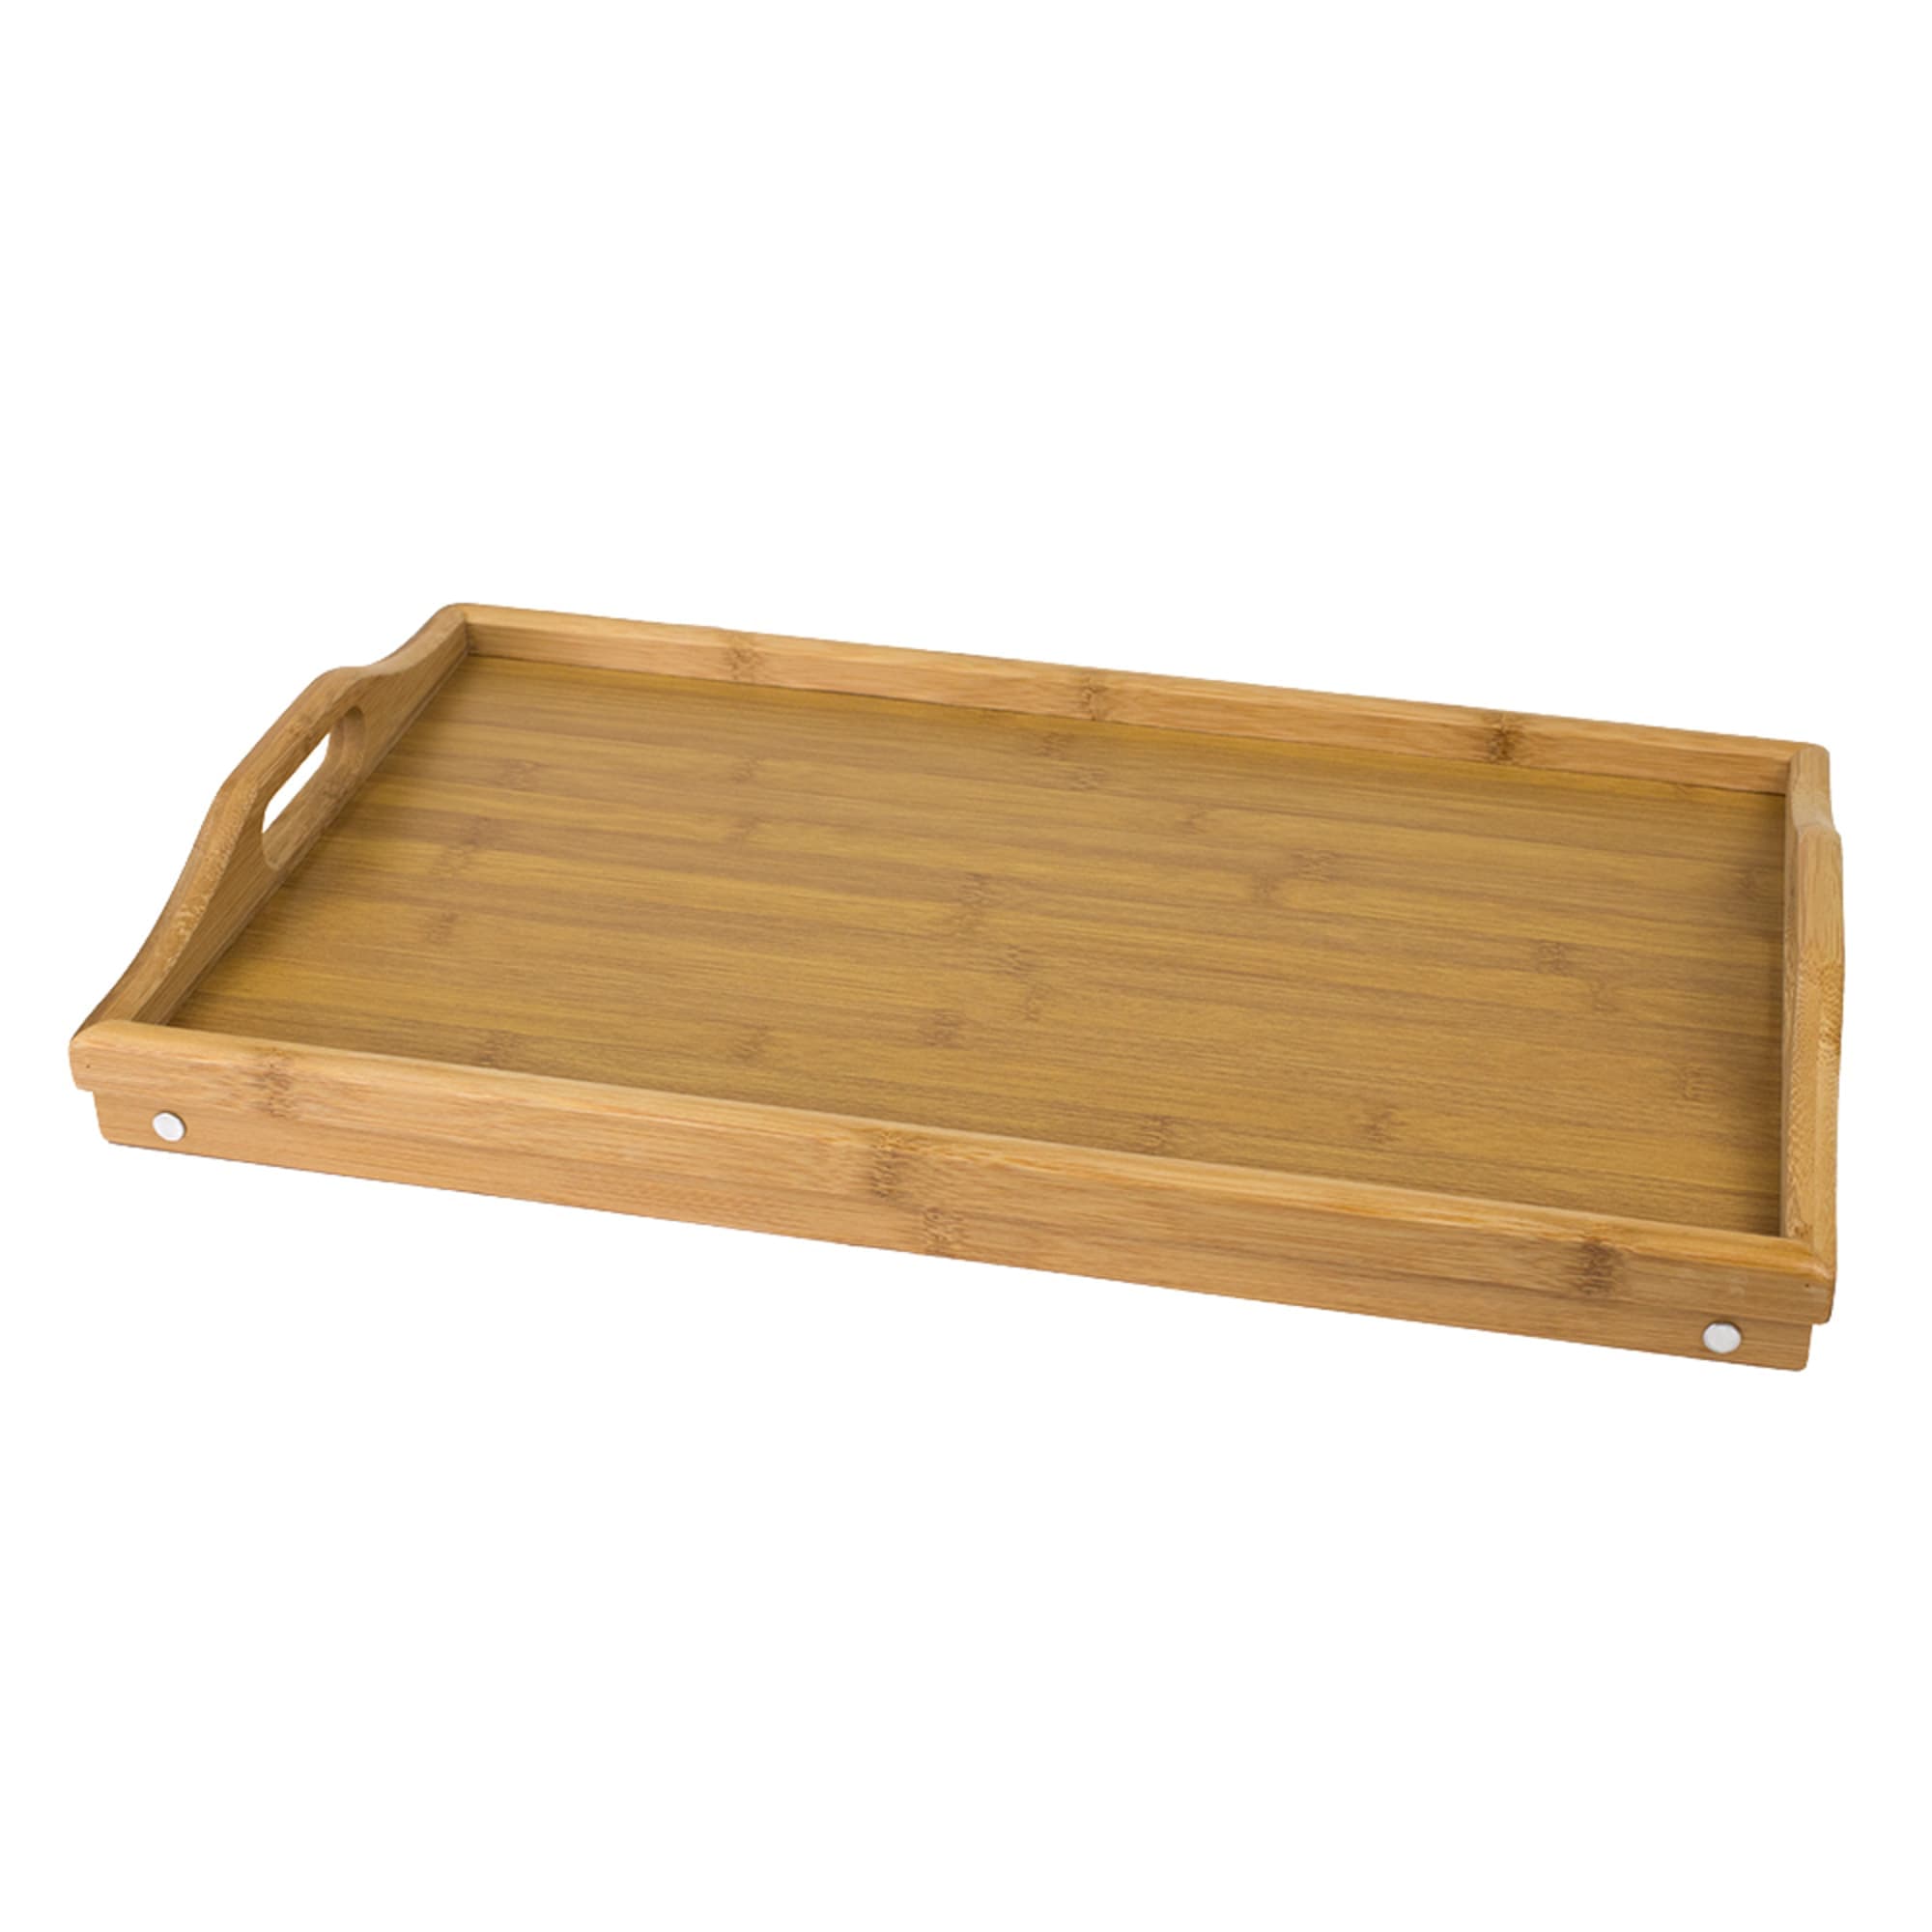 Home Basics Multi-Purpose Folding Bamboo Bed Tray with Cut-out Handles $15.00 EACH, CASE PACK OF 6